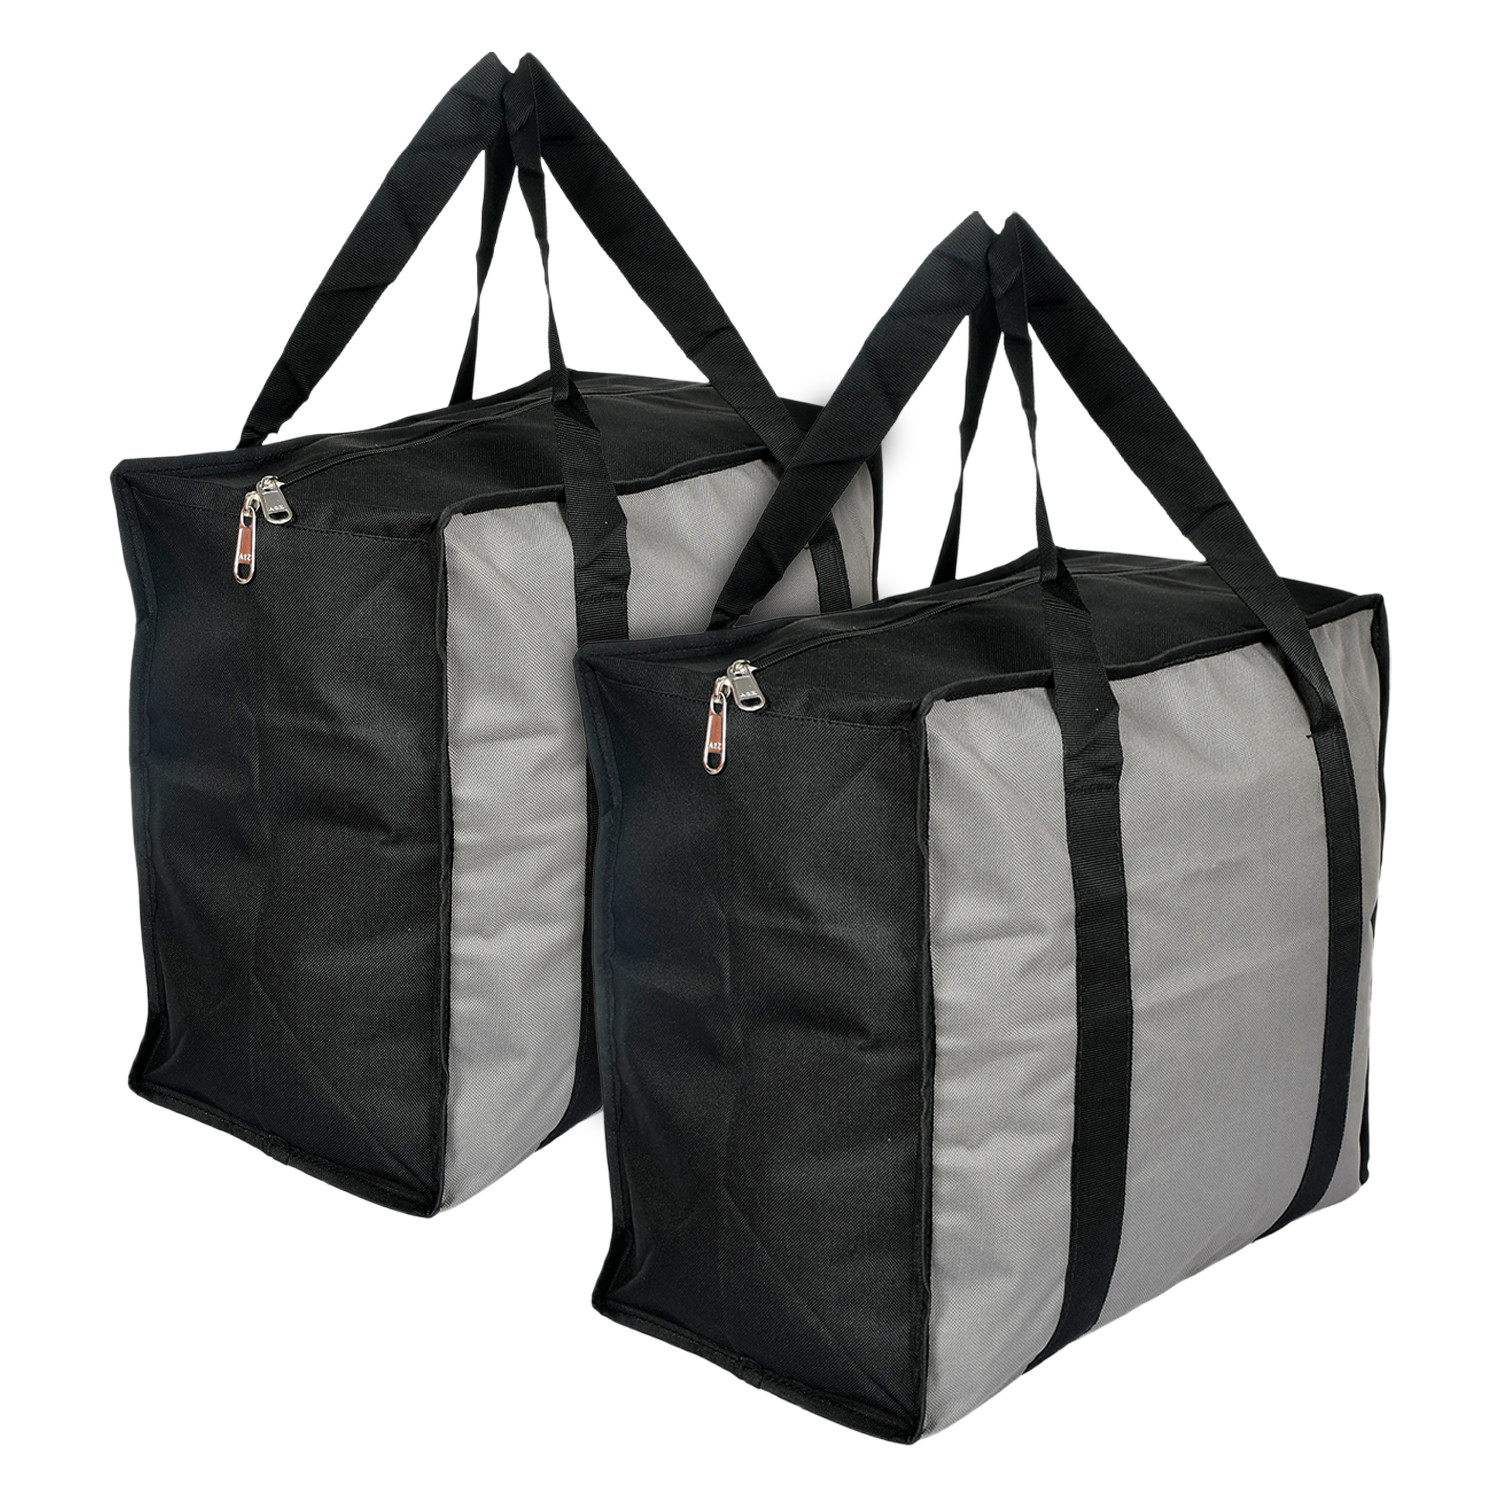 Kuber Industries Rexine Shopping Bags/Grocery Bag for Carry Grocery, Fruits, Vegetable with Handles (Grey) 54KM4017